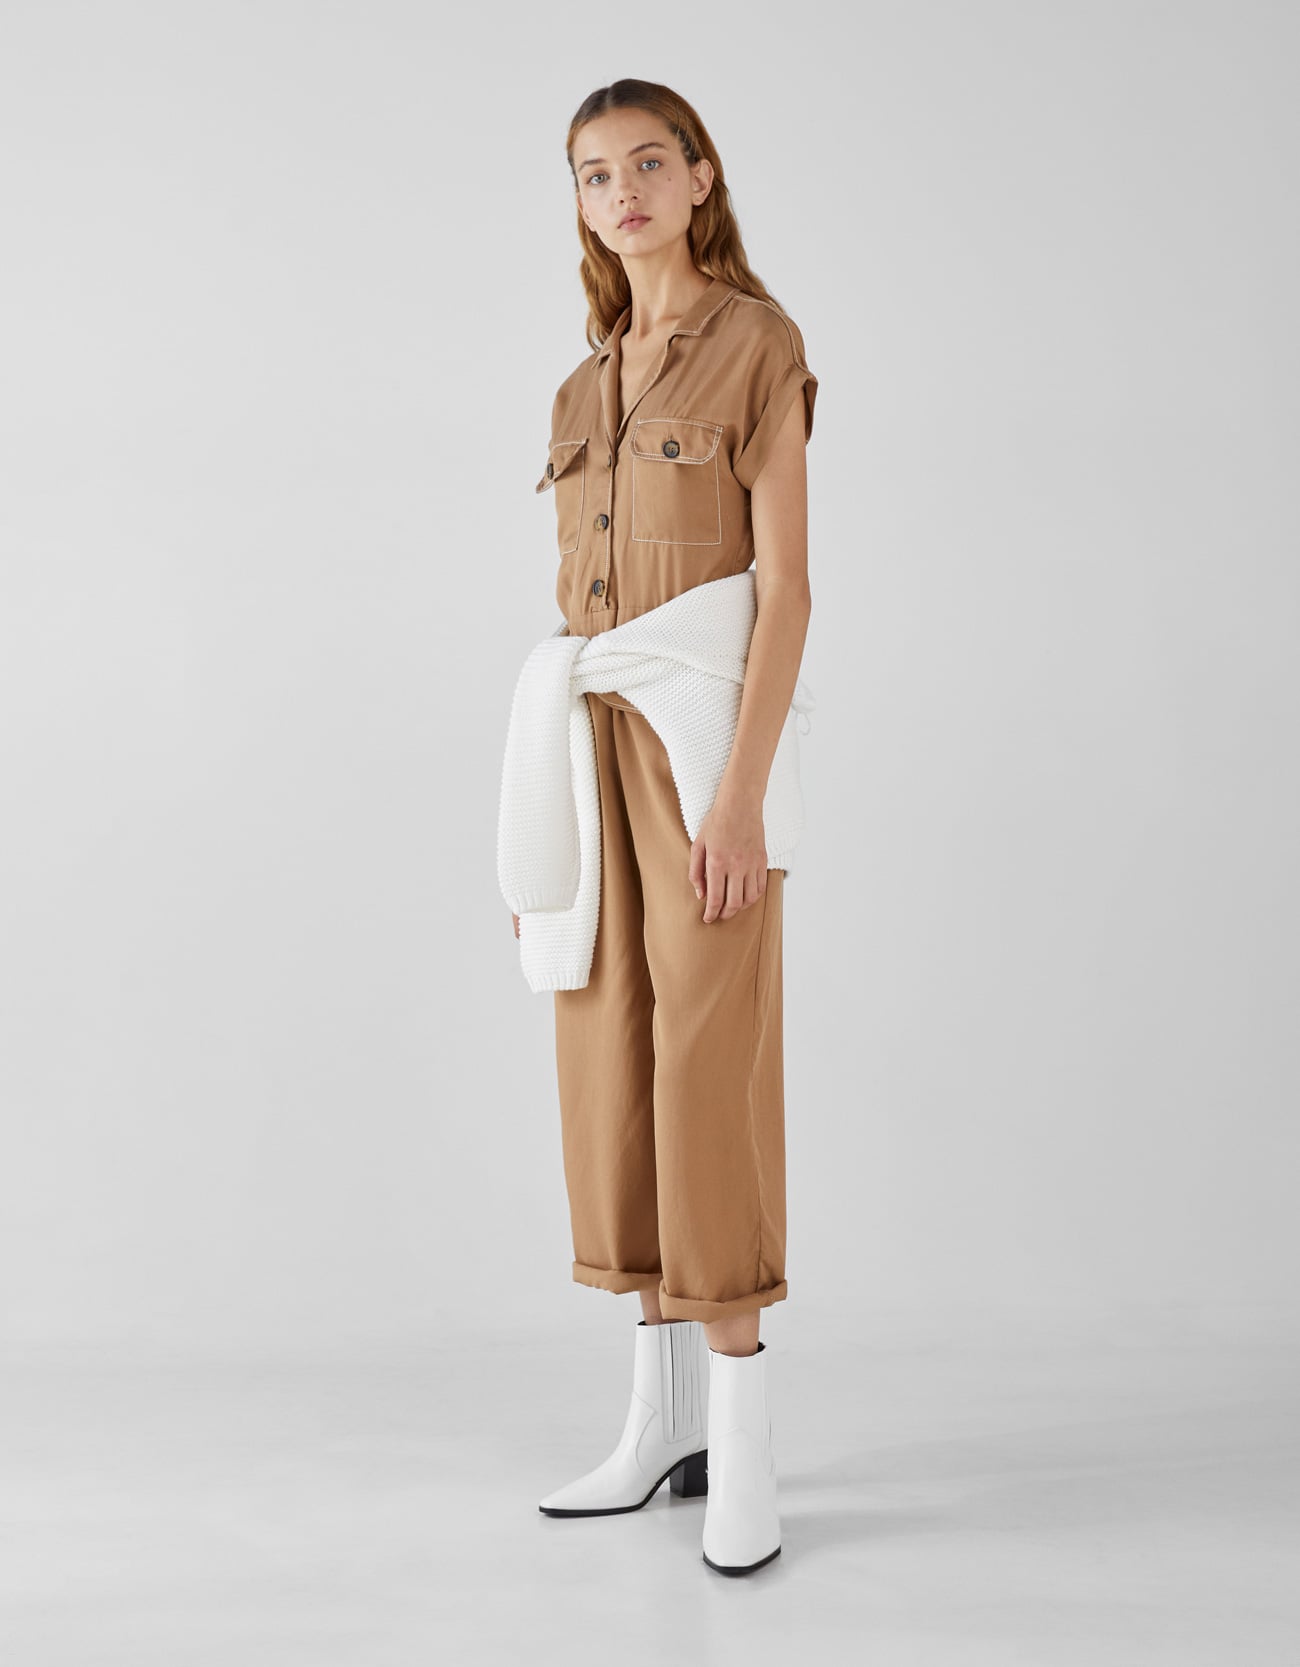 Bershka Long Jumpsuit With Belt | Why This New Jumpsuit Trend Is Ultimate Off-Duty Outfit | Fashion Photo 14